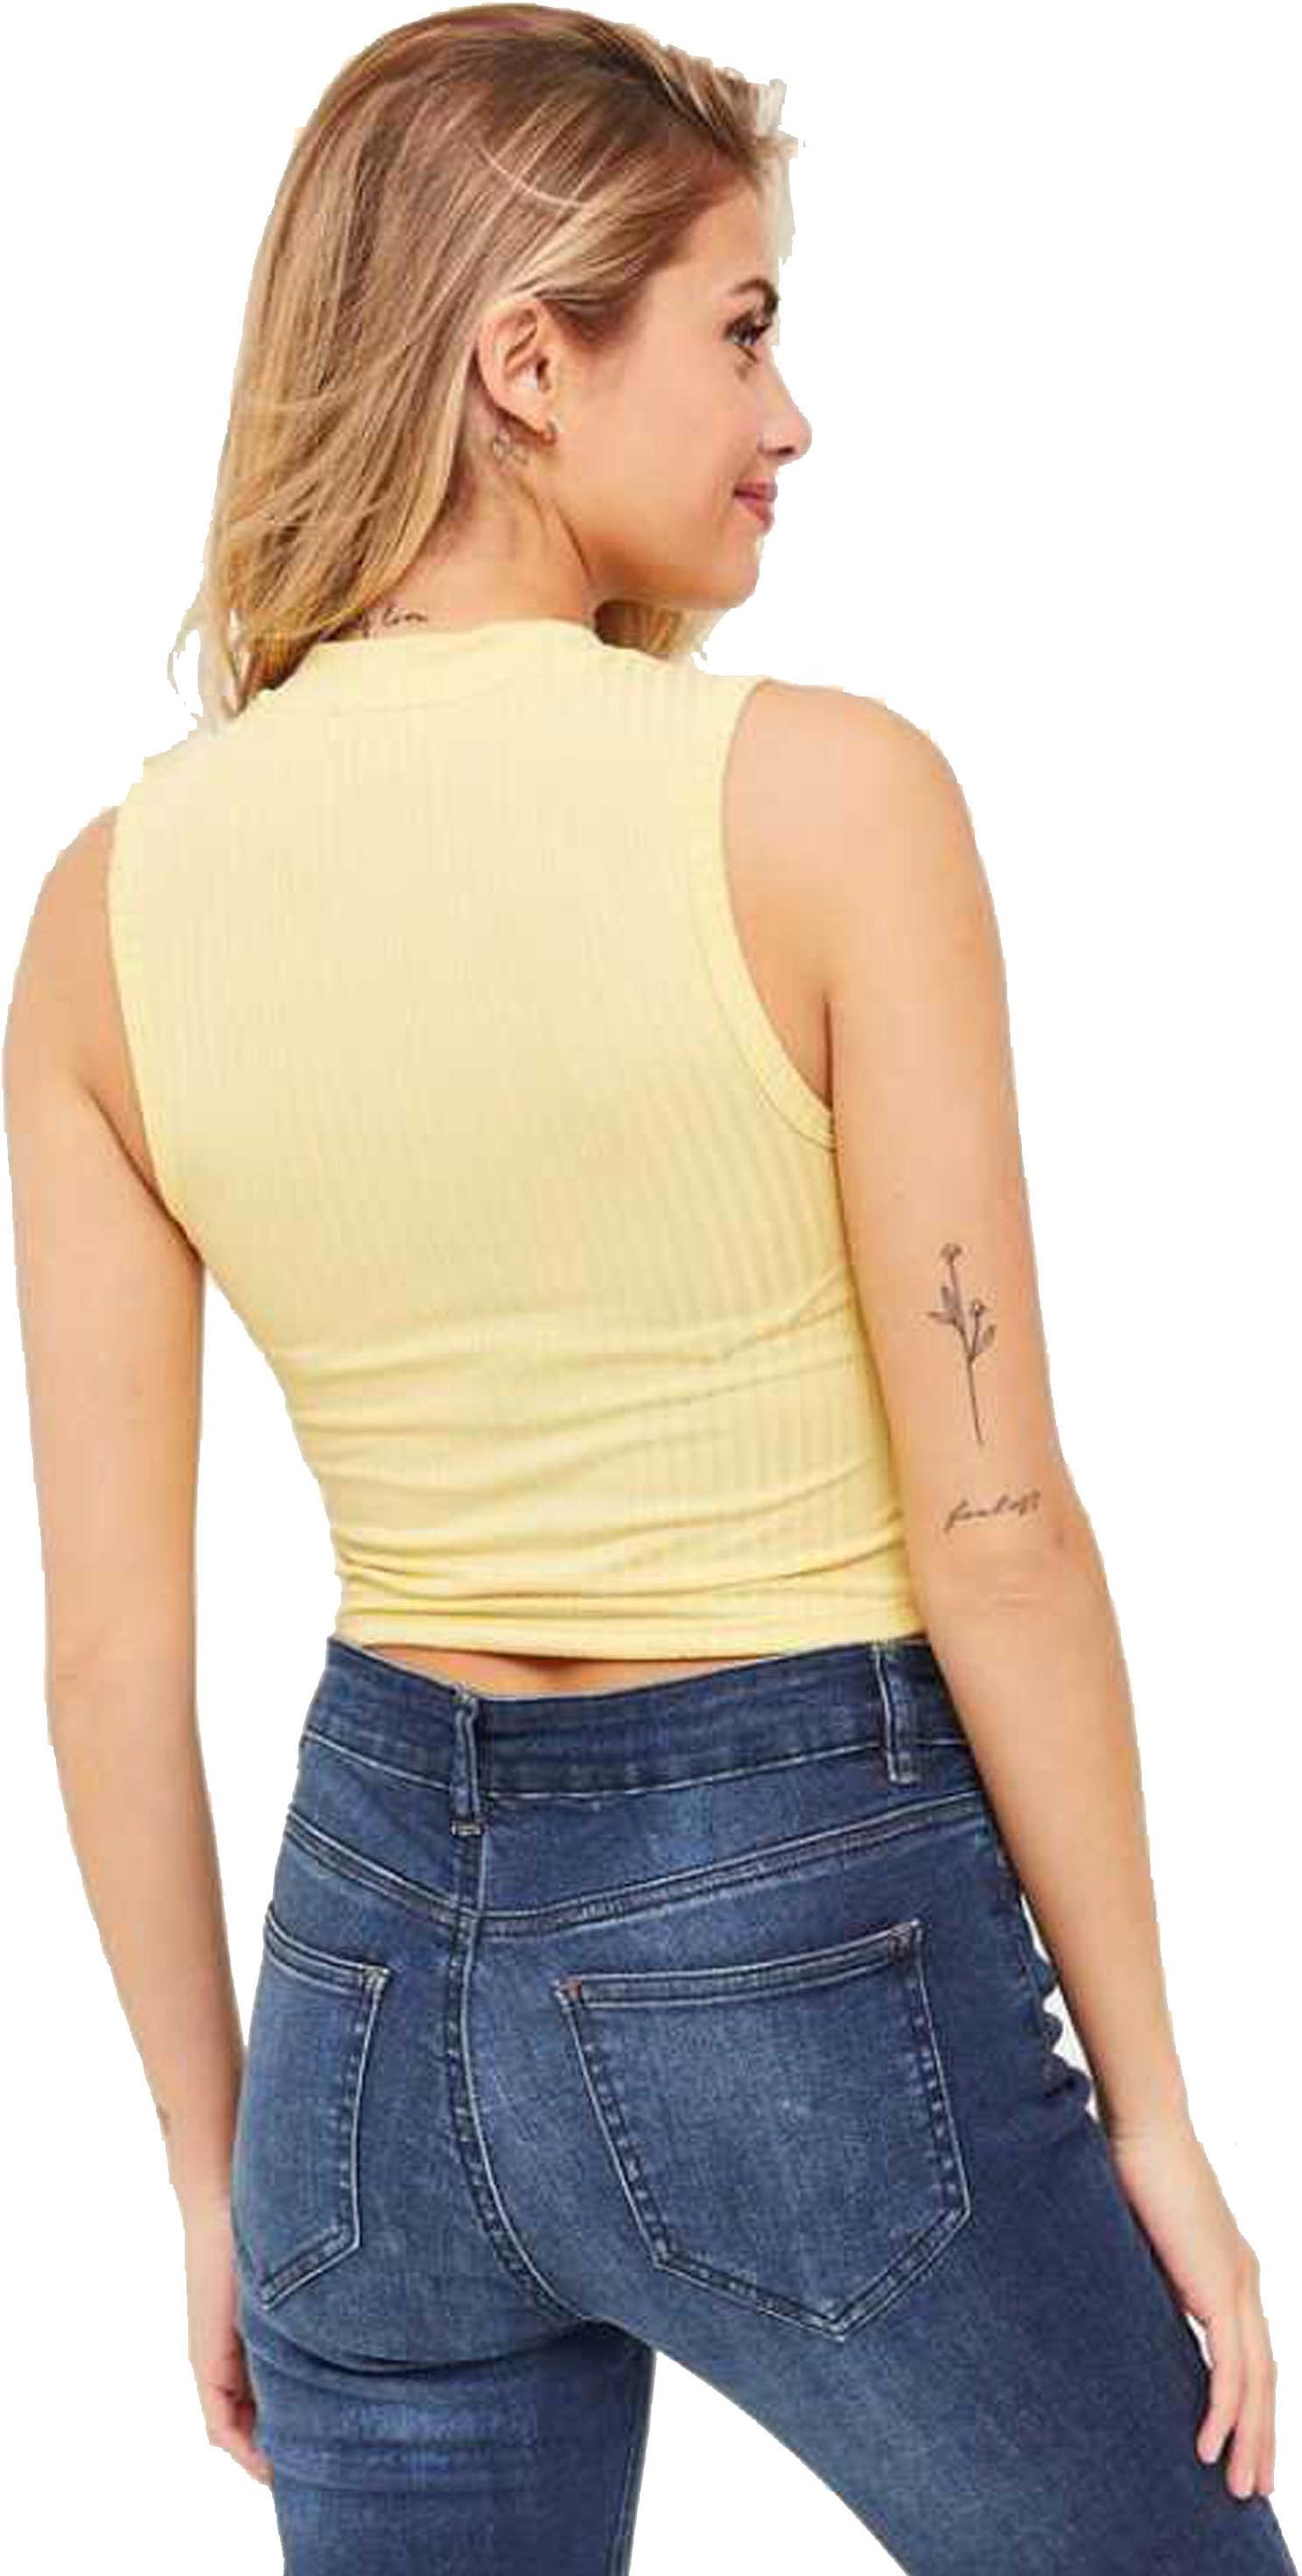 Casual Sleeveless Solid Yellow Cotton Blend Crop Top!!